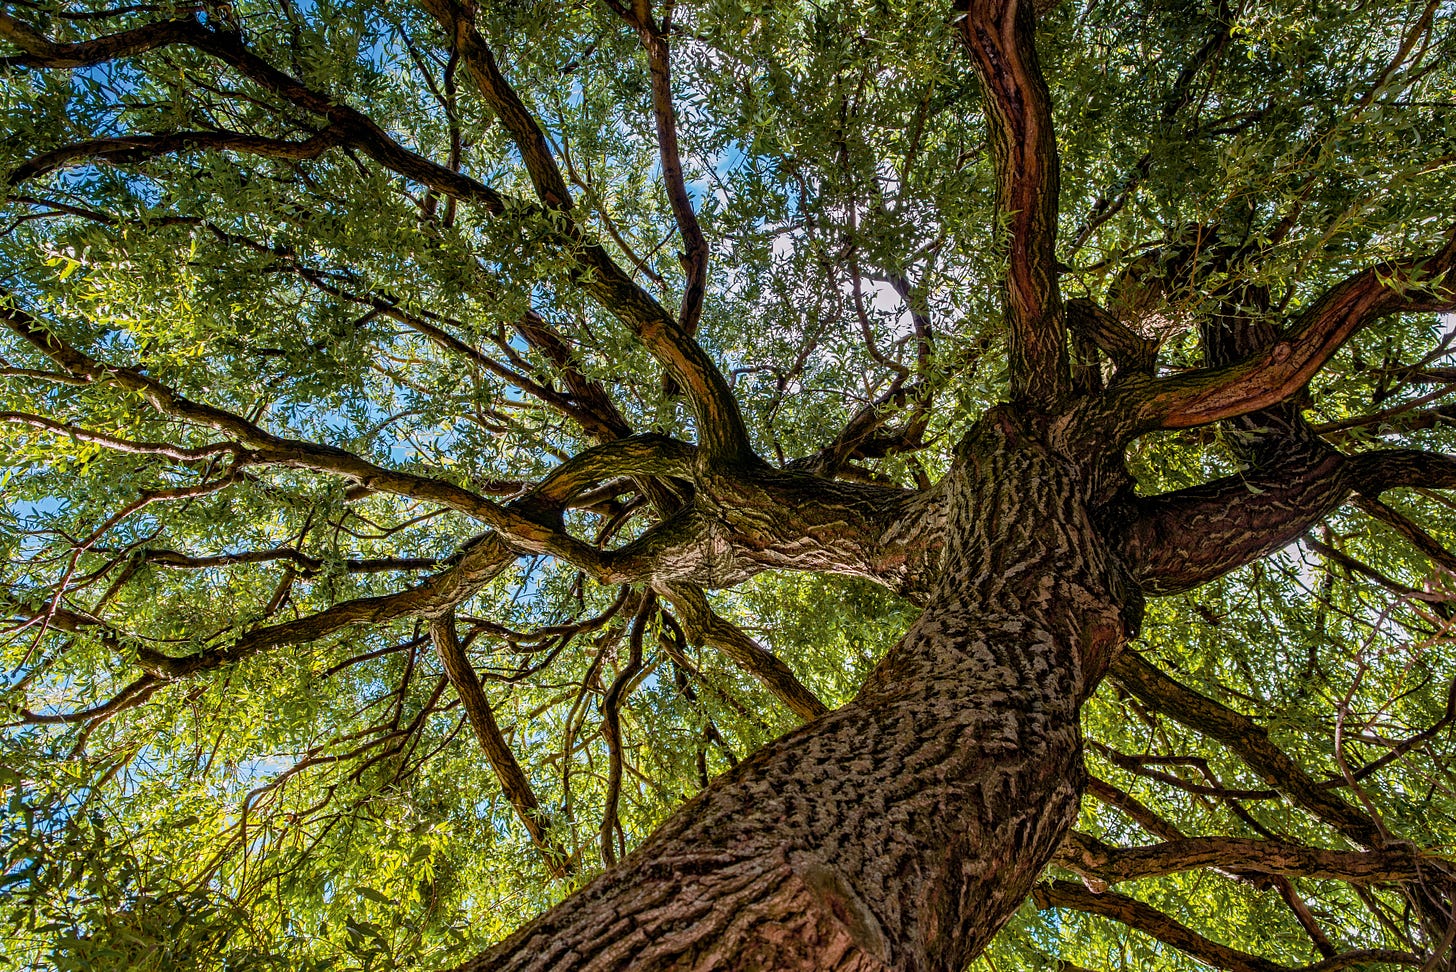 Image from under a massive tree looking upward at the branches.